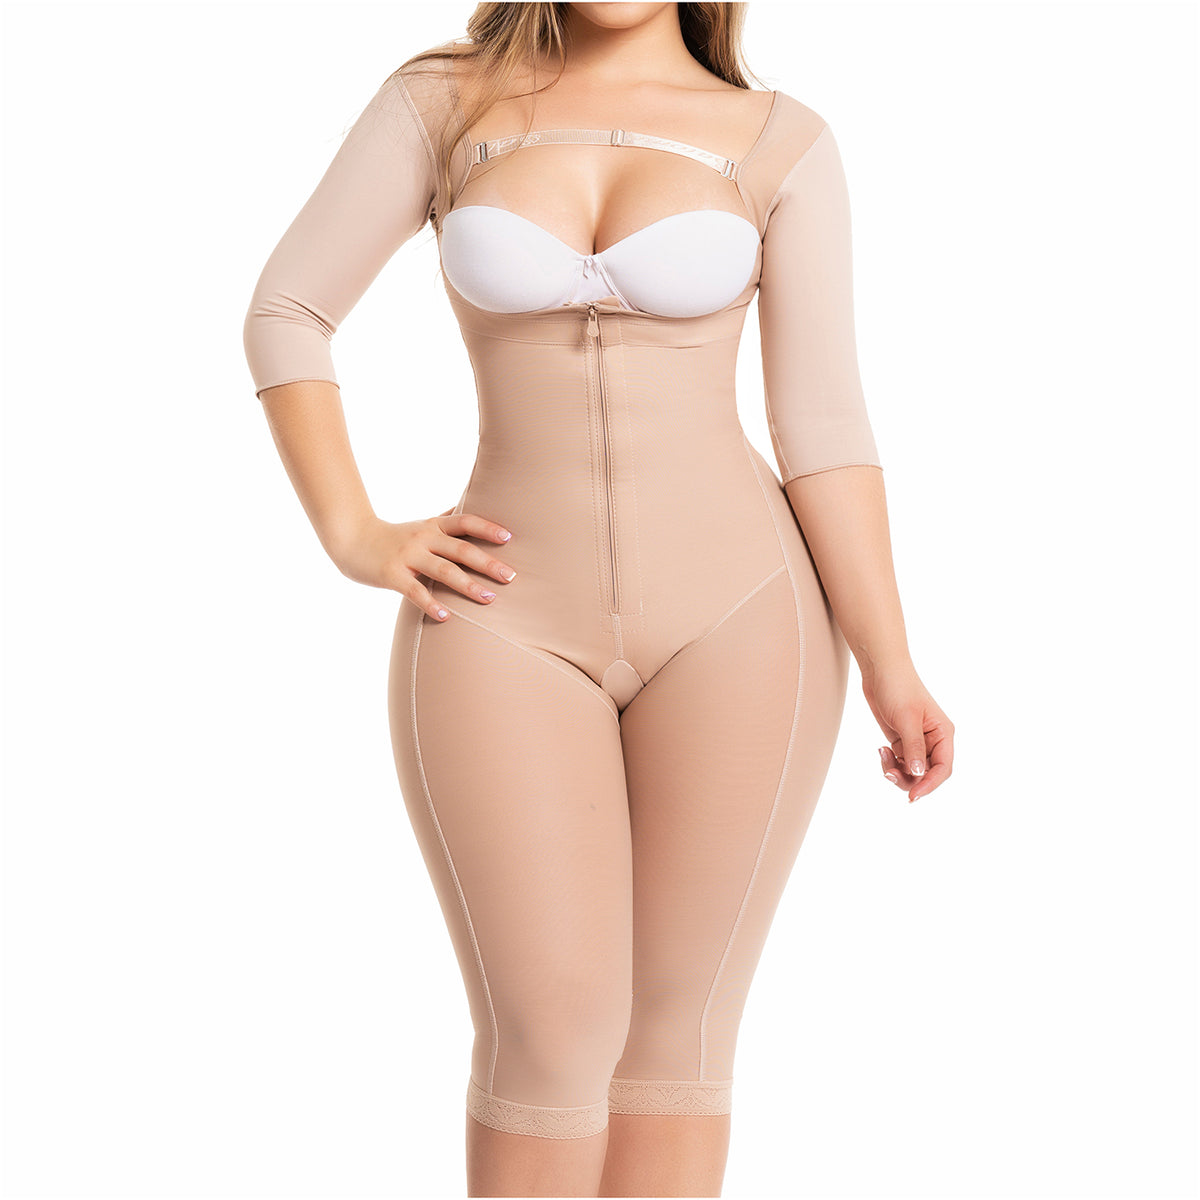 Salome 0417 Fajas Colombianas Reductoras Colombian Shapewear for